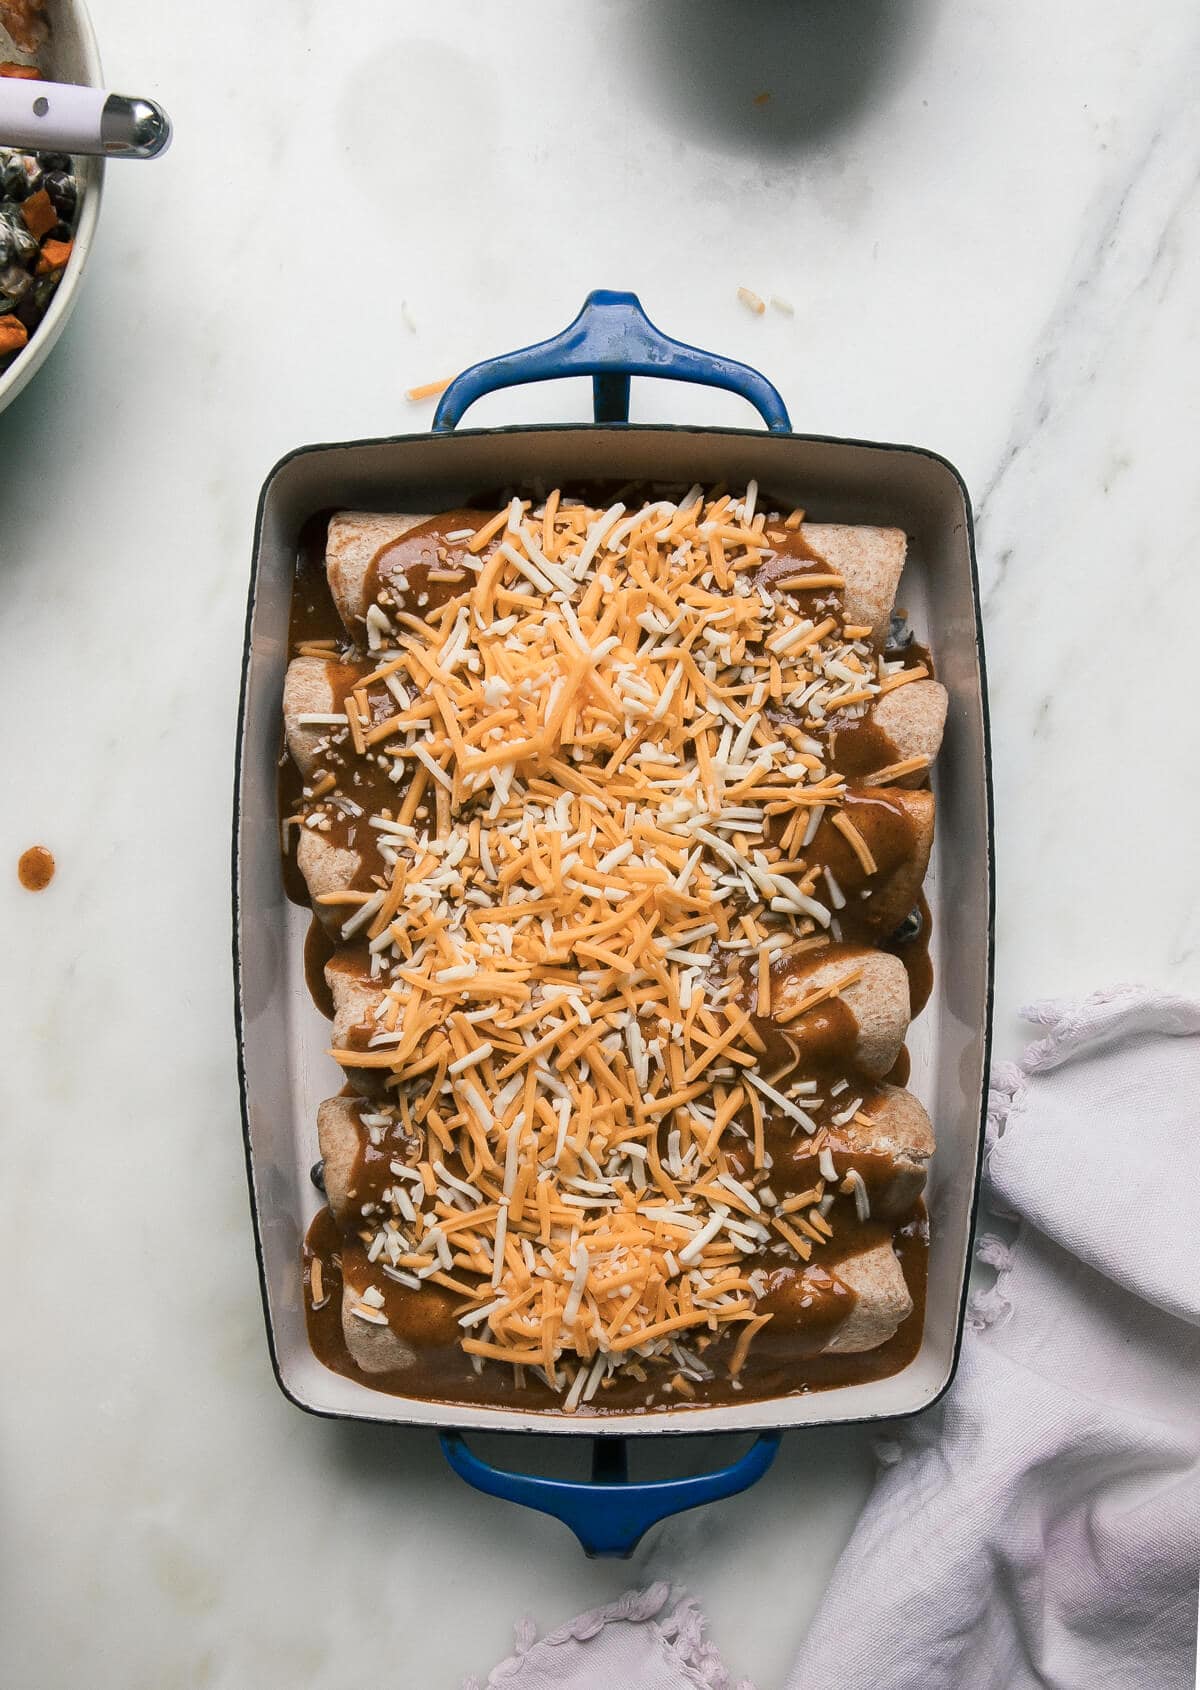 Unbaked enchiladas topped with enchilada sauce and shredded cheese.